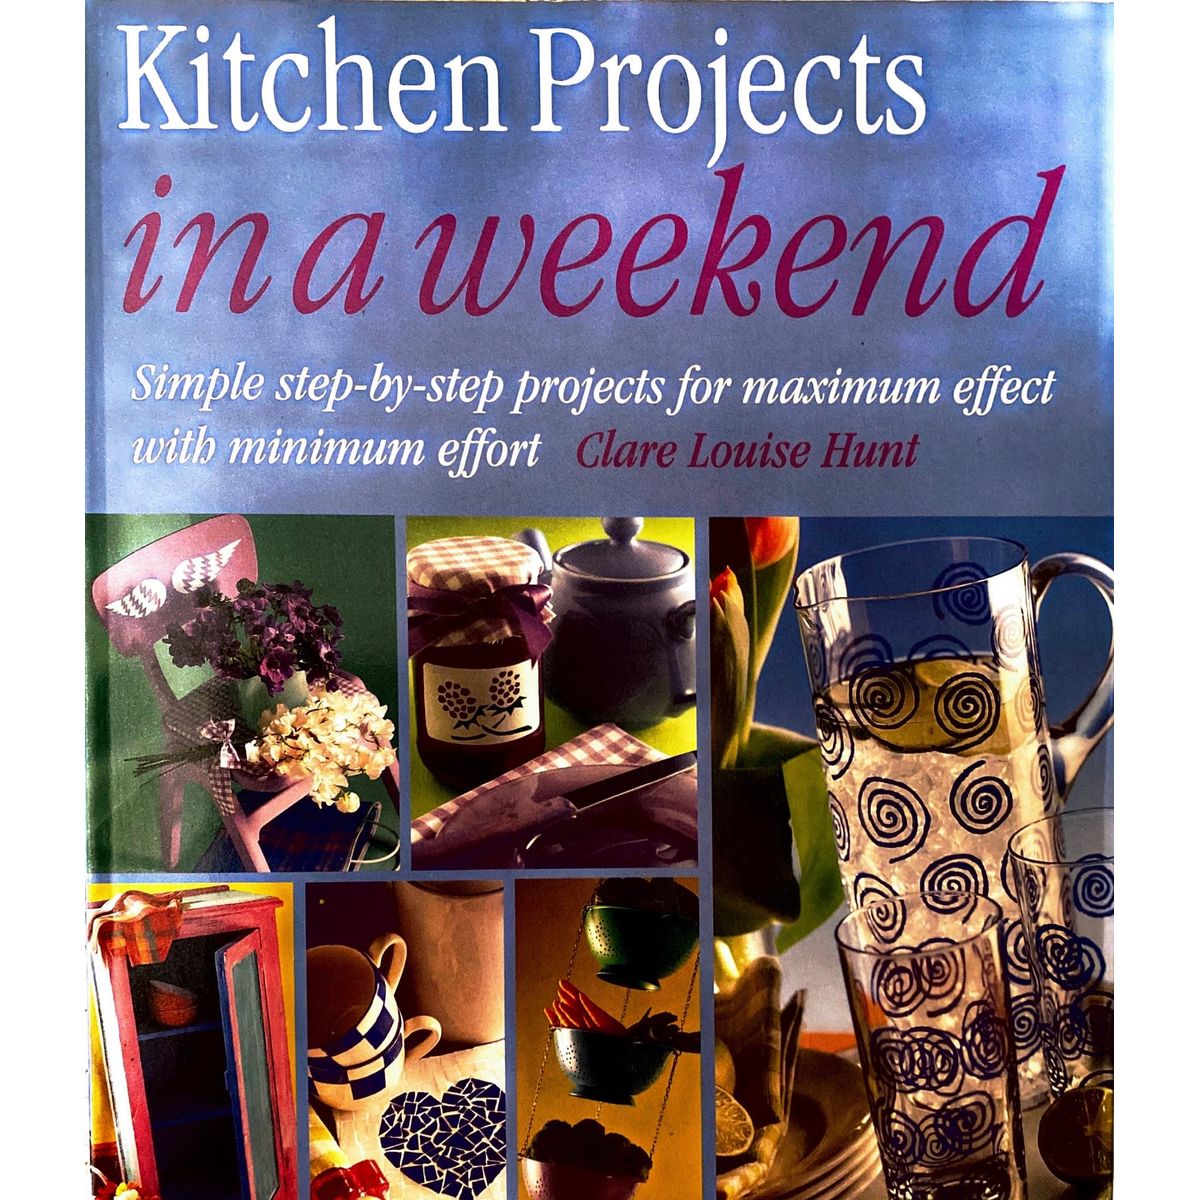 ISBN: 9781853916236 / 1853916234 - Kitchen Projects in a Weekend by Clare Louise Hunt, 1st Edition [1998]